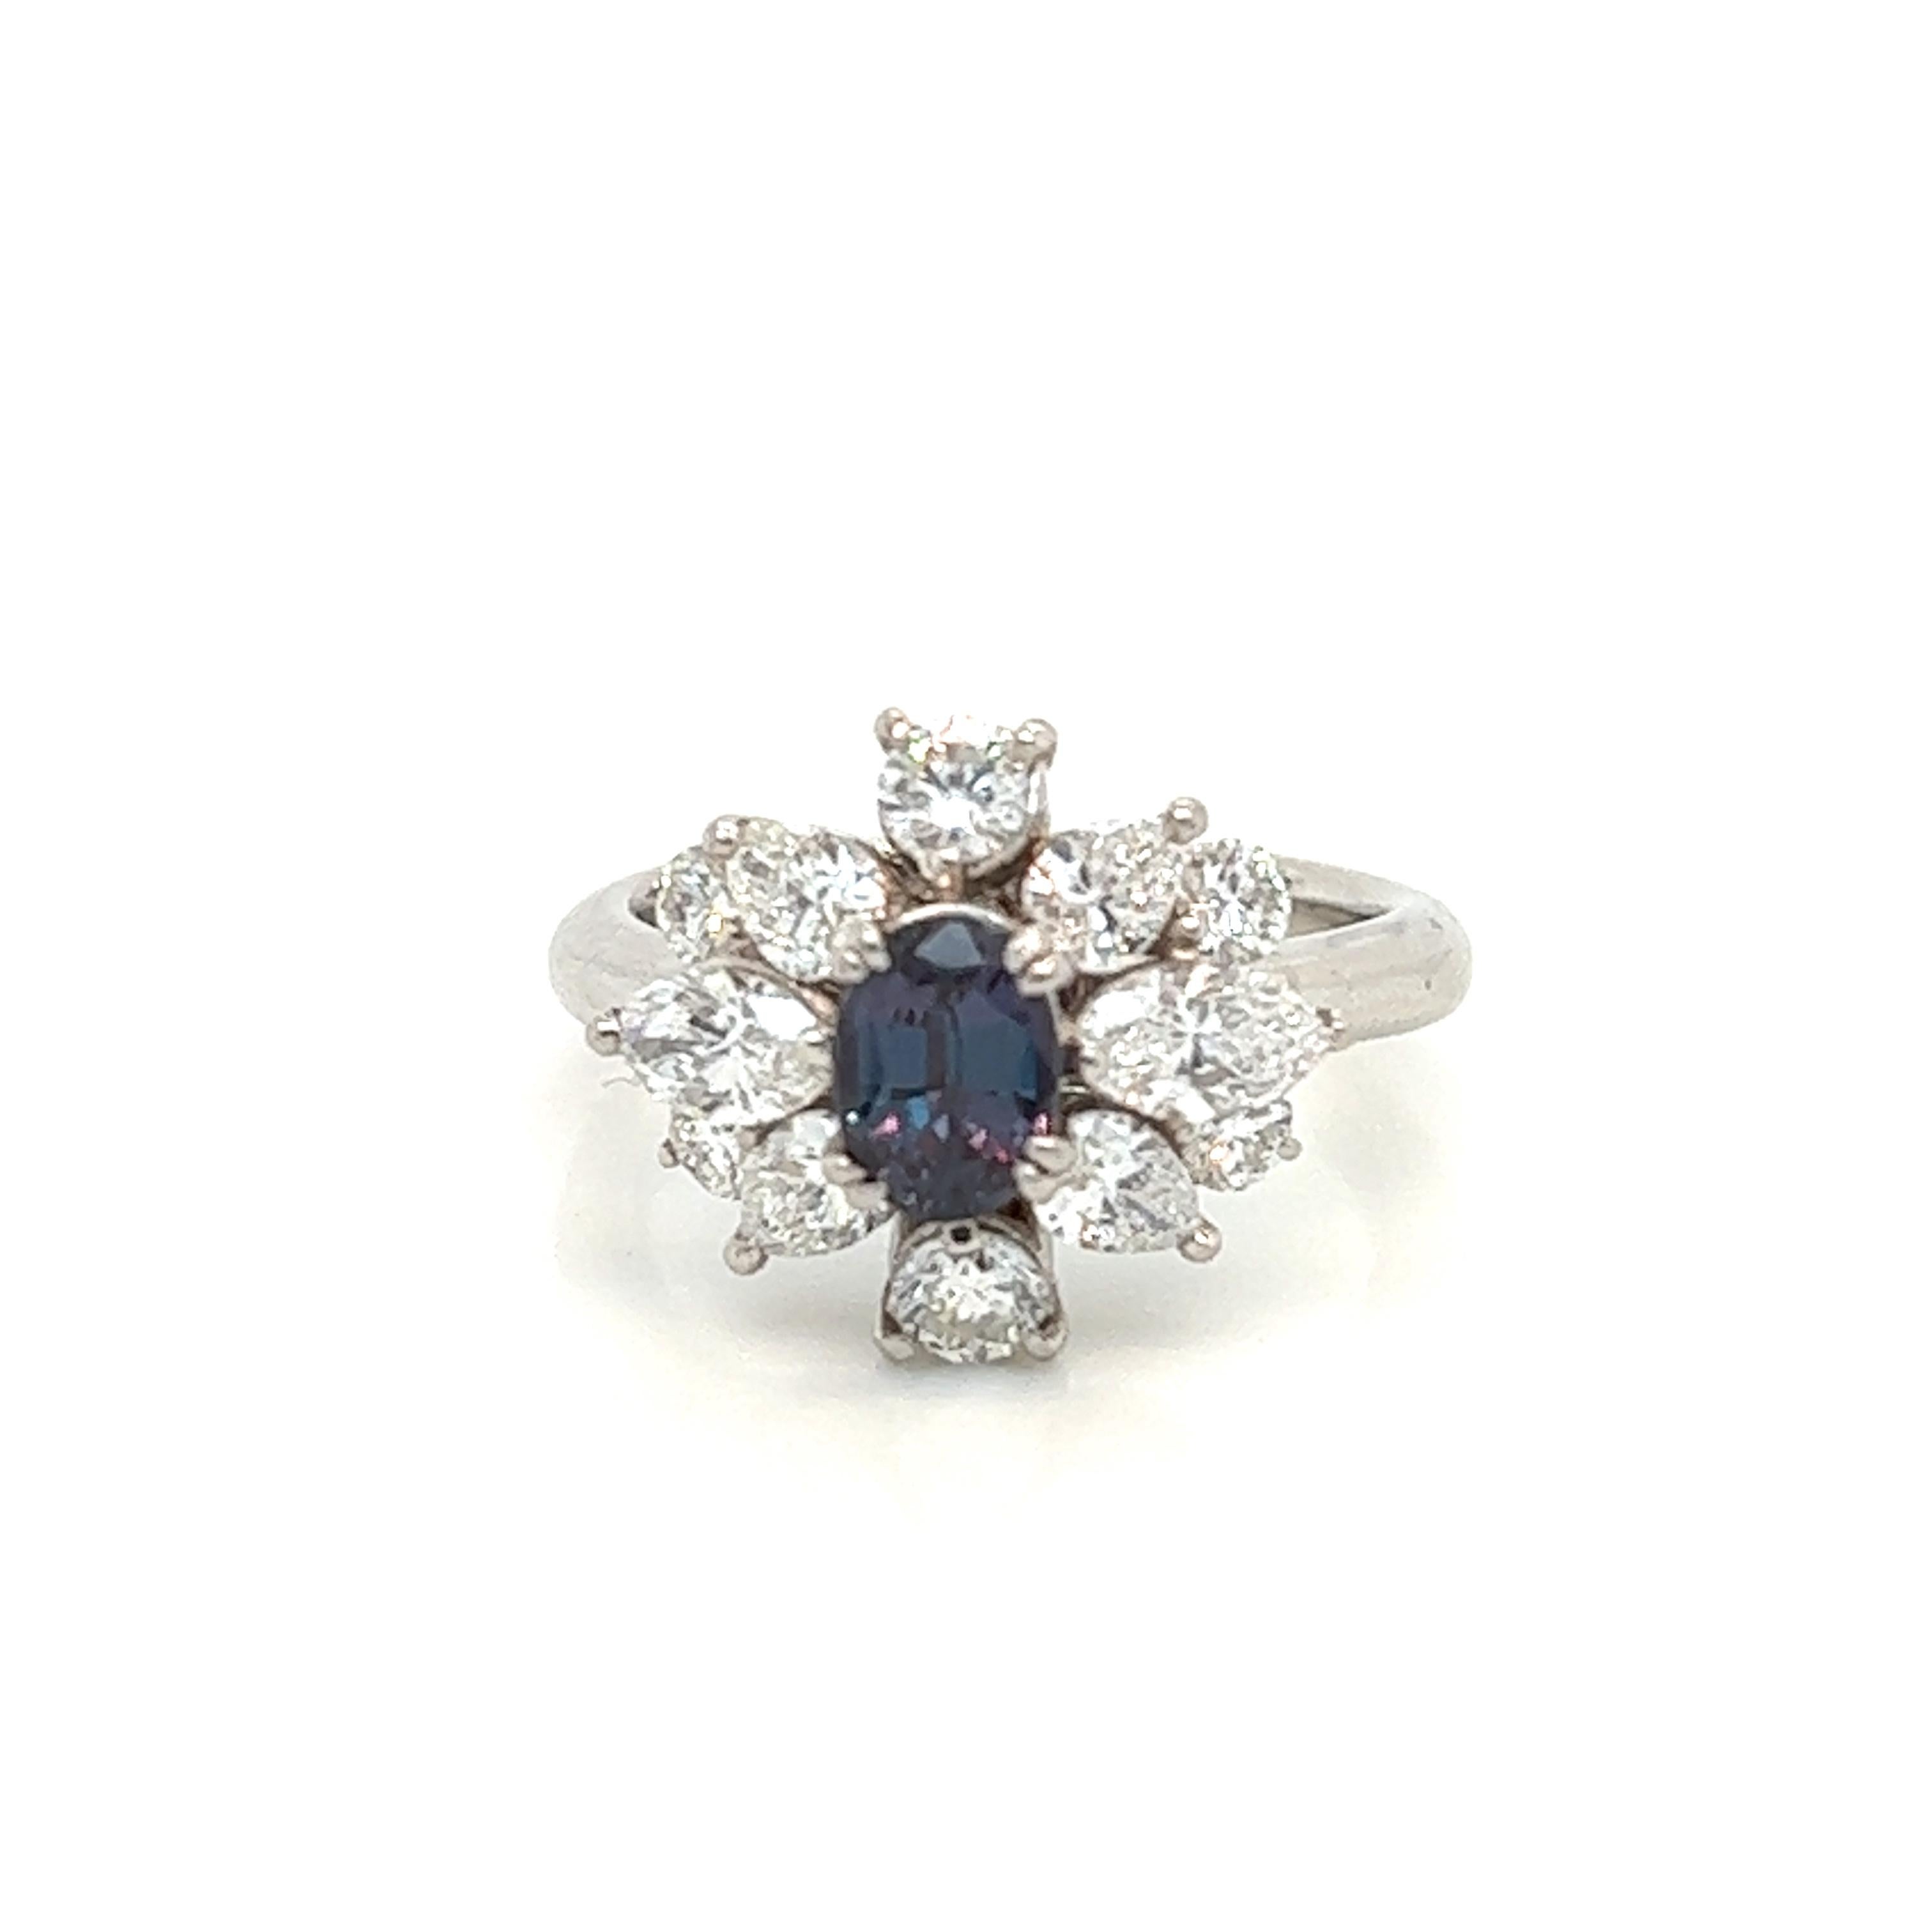 This is a gorgeous natural AAA quality oval Alexandrite surrounded by dainty diamonds that is set in a vintage platinum setting. This ring features a natural 0.85 carat oval alexandrite that is certified by the Gemological Institute of America (GIA)